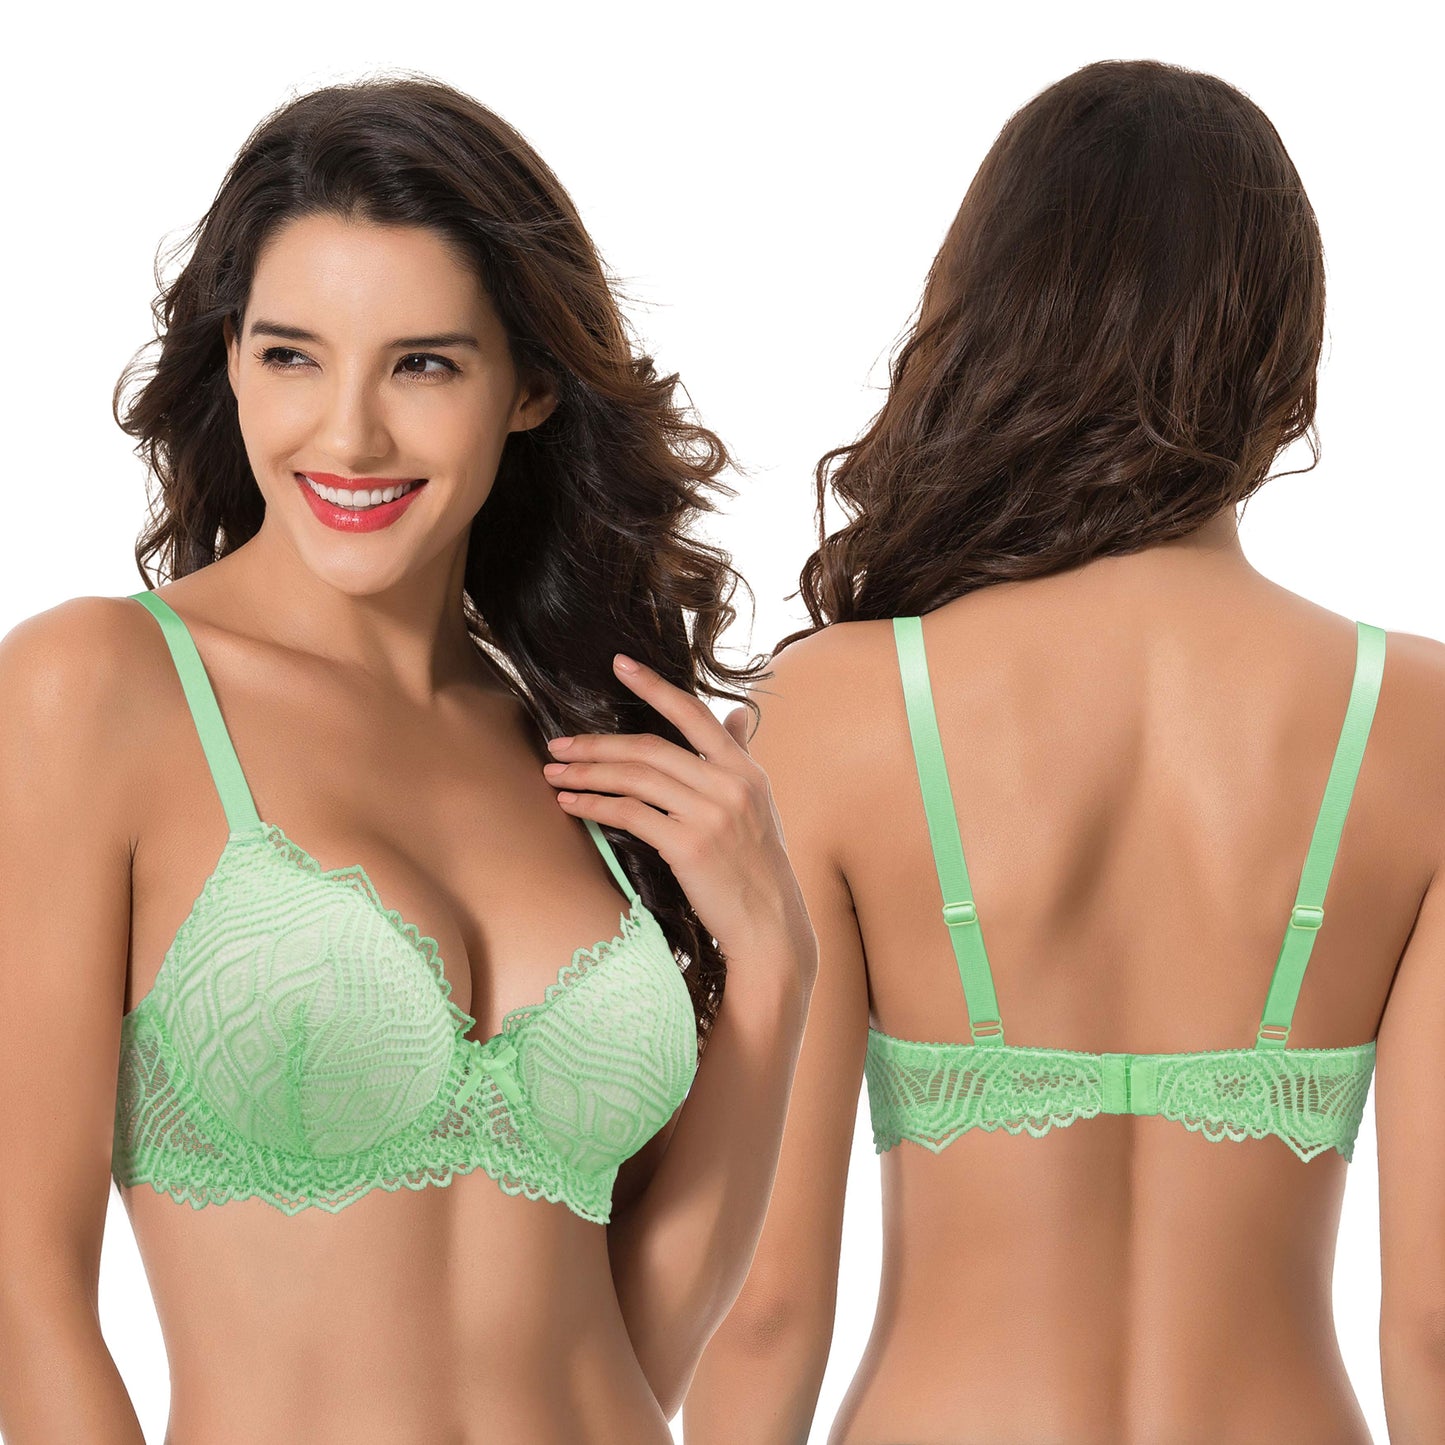 Women's Plus Size Push Up Add 1 Cup Underwire Perfect Shape Lace Bras